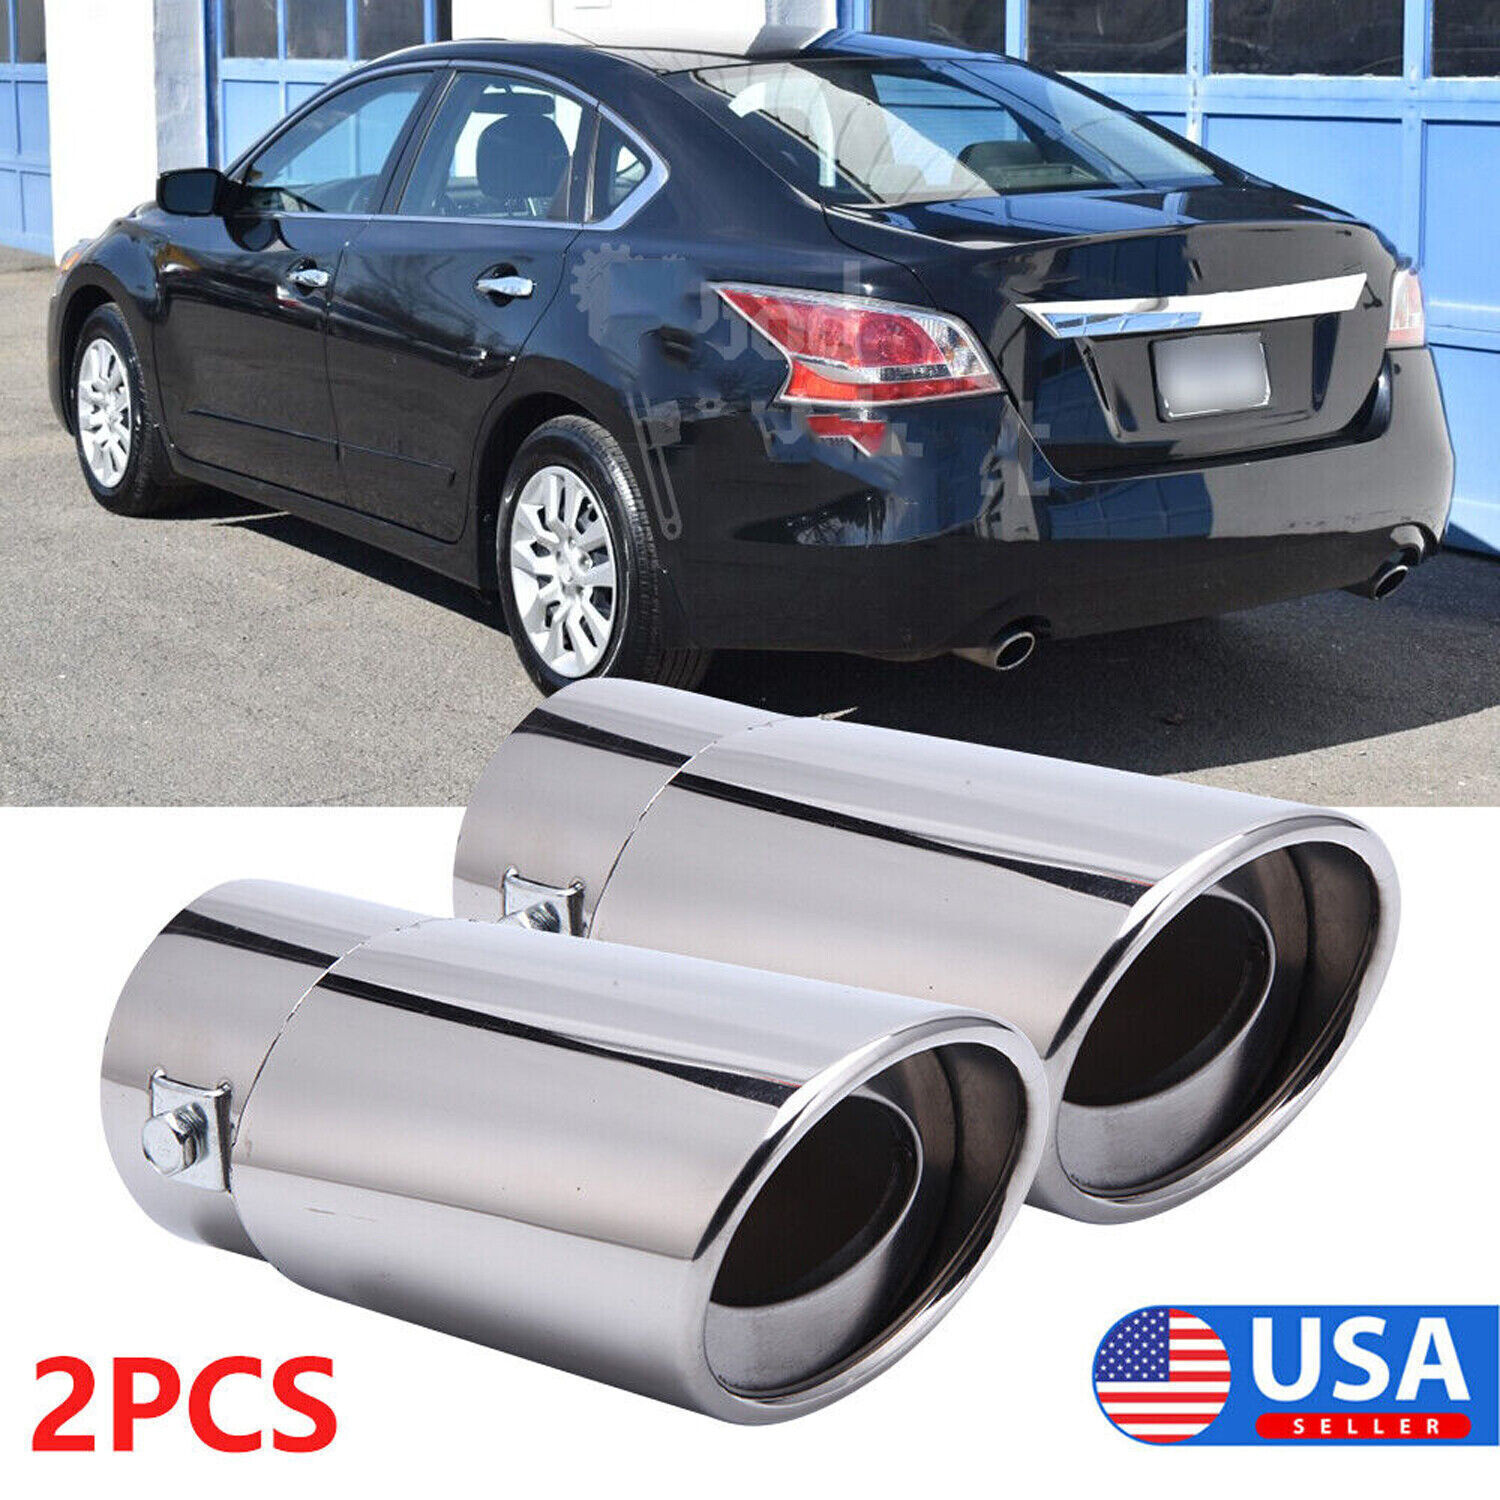 2PCS For Nissan Altima Rogue Exhaust Pipe Tip Rear Tail Muffler Stainless Steel